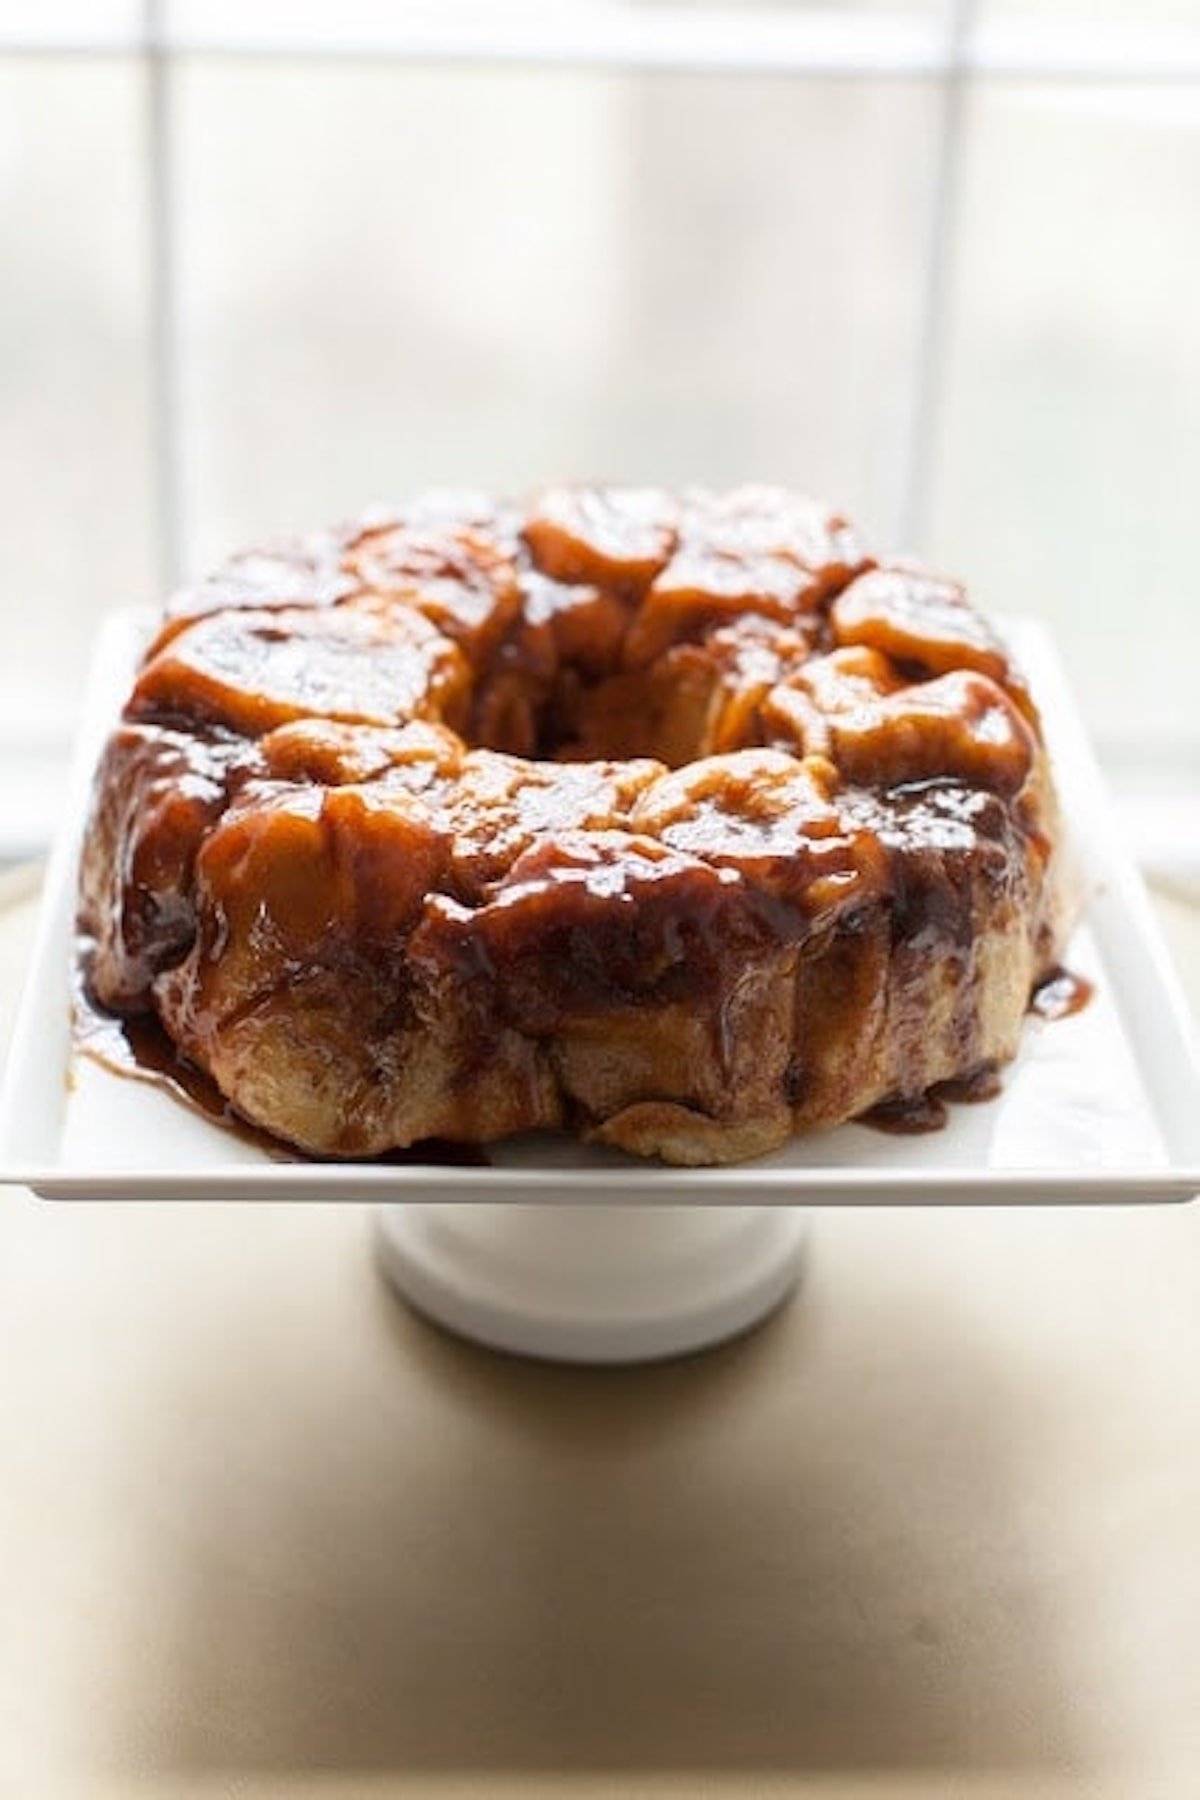 A caramel-glazed overnight monkey bread sits on a white square cake stand in front of a blurred window.